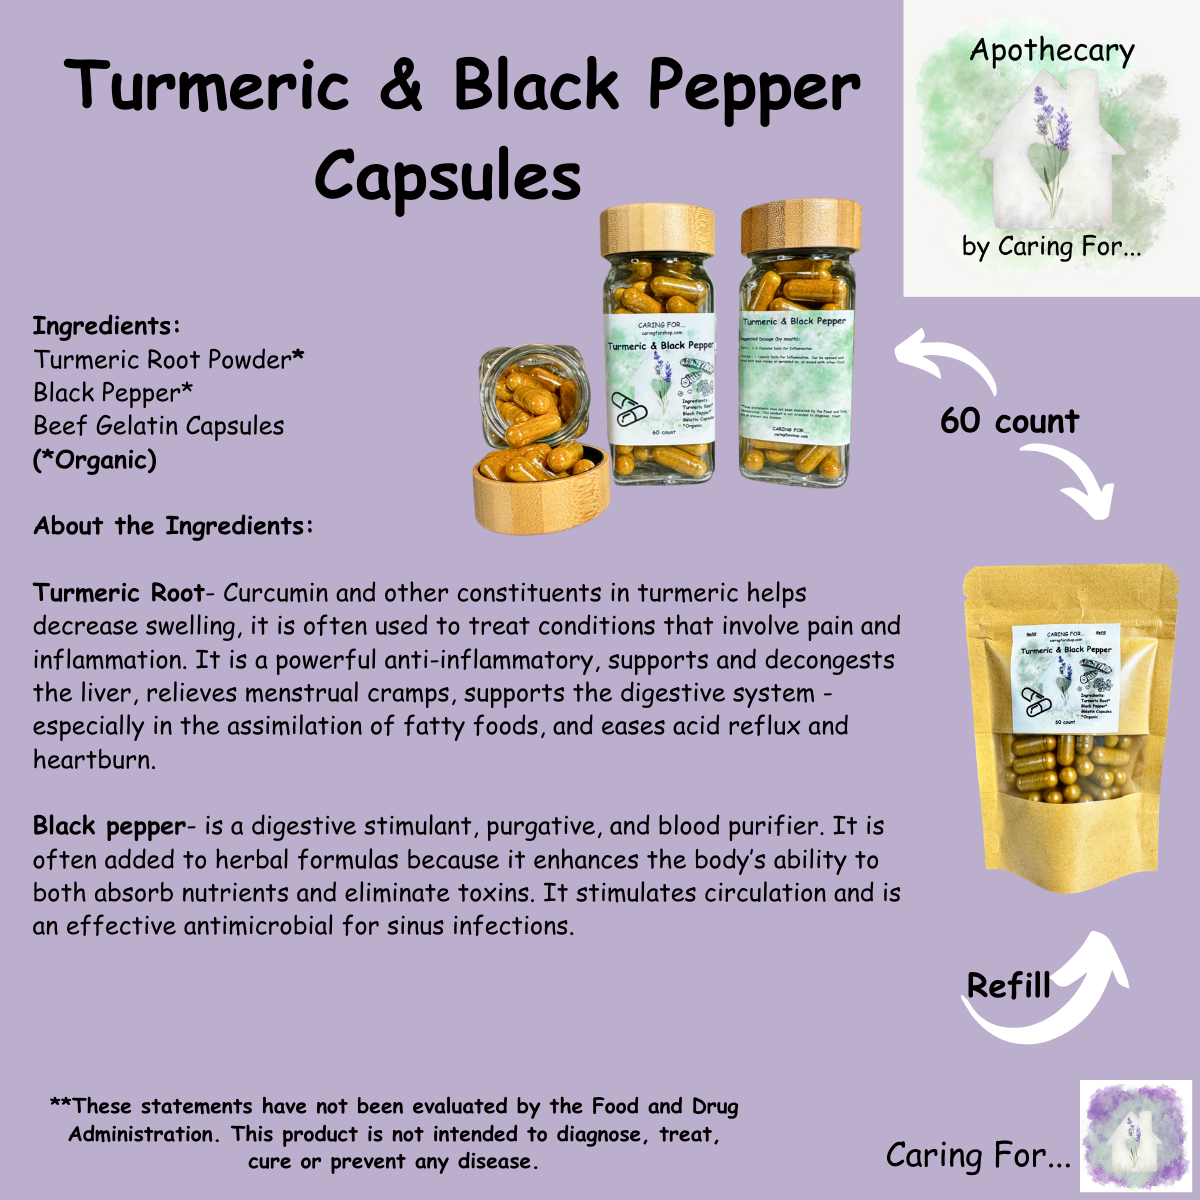 Tumeric & Black Pepper Capsules | Anti-Inflamatory Capsules | Digestive Aid | Apothecary by Caring For...